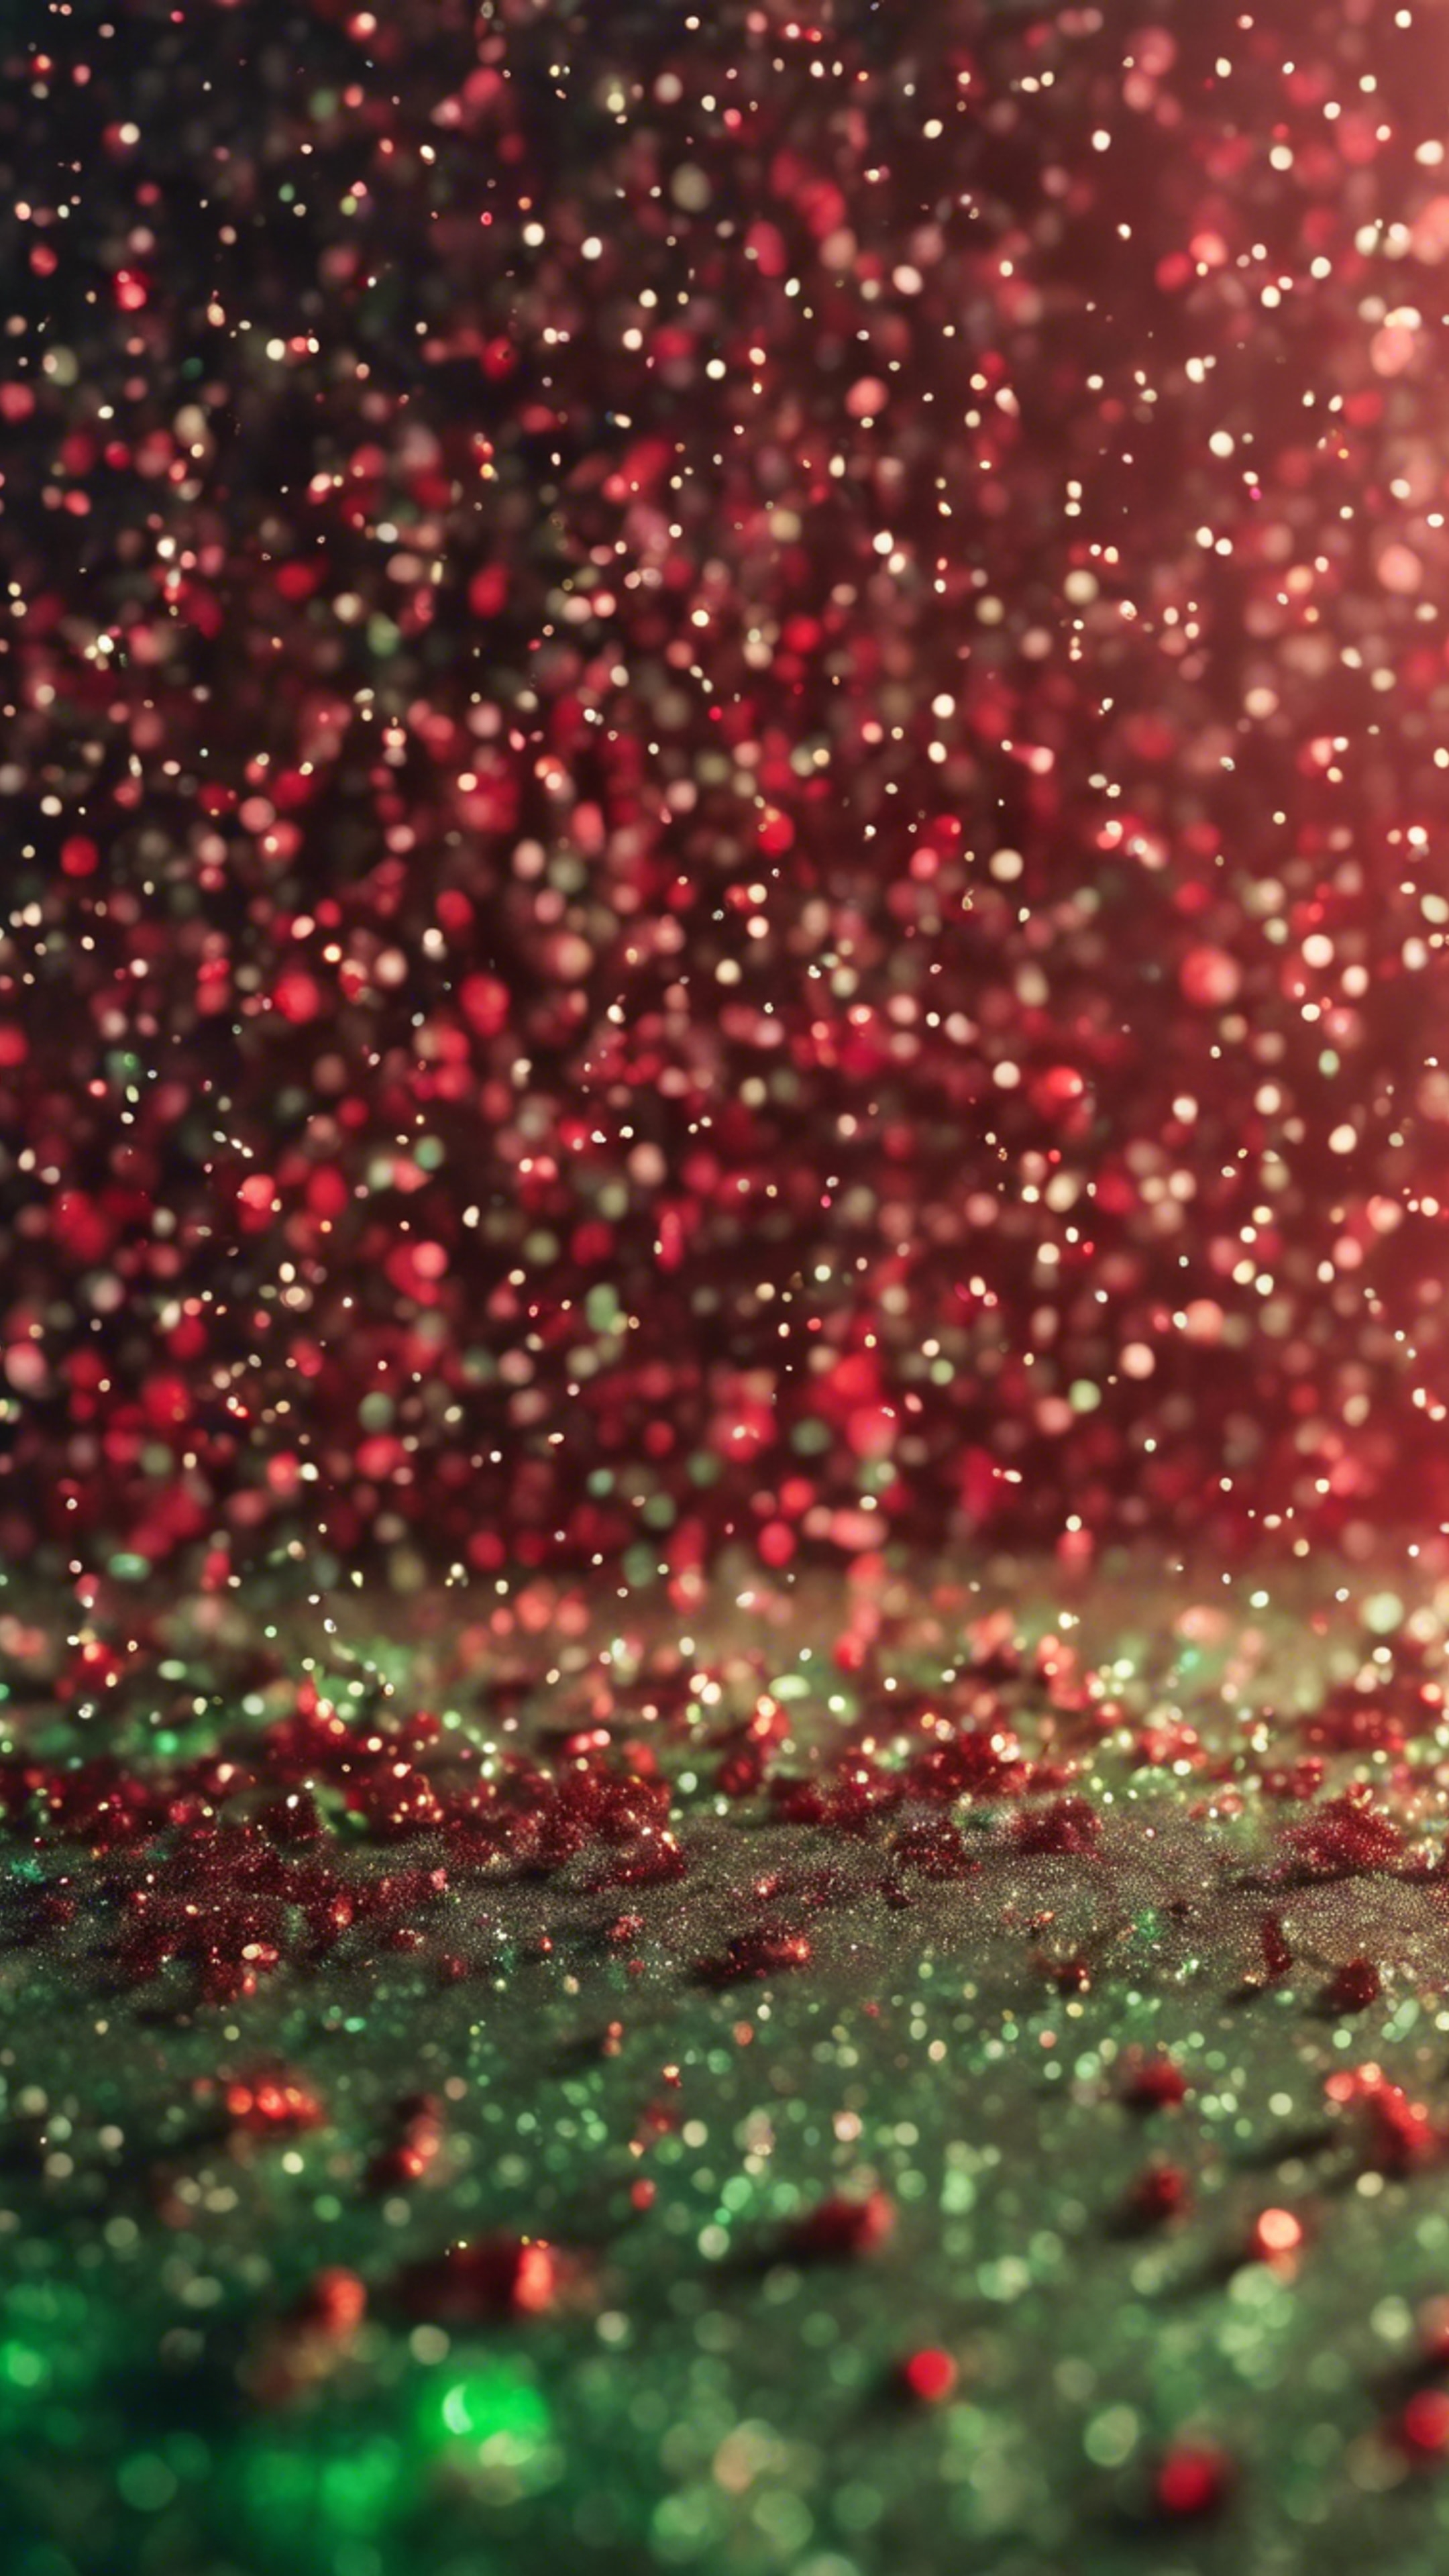 Tiny green and red glitter particles scattered randomly Ფონი[e9e8f5a2023d489ba4c1]